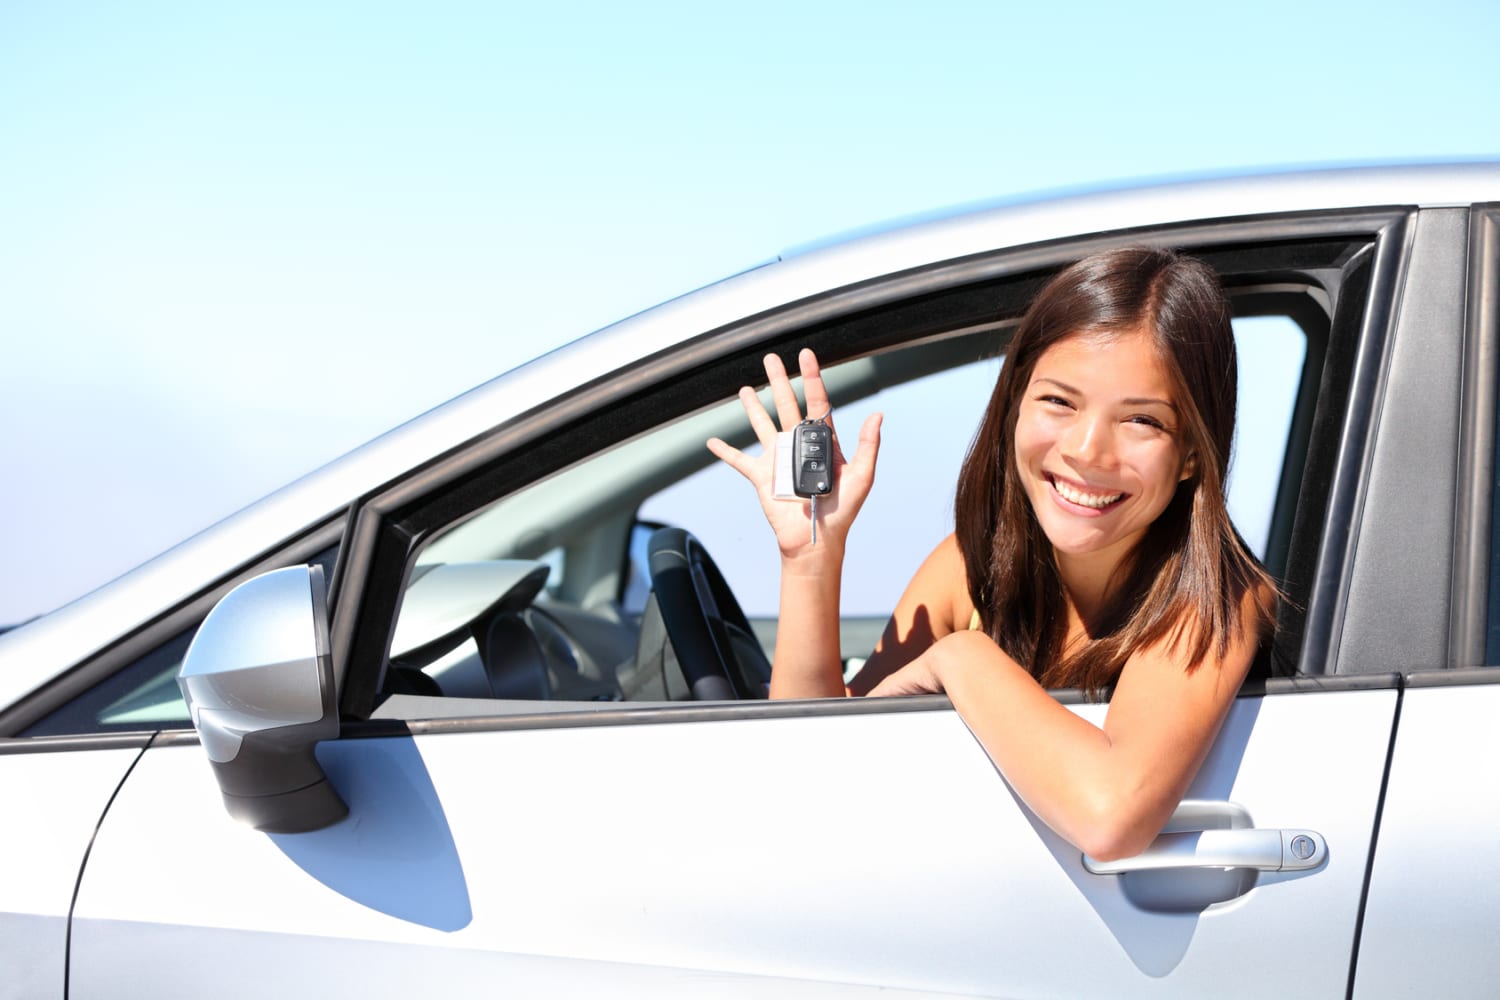 17 year old woman smiling showing new car keys